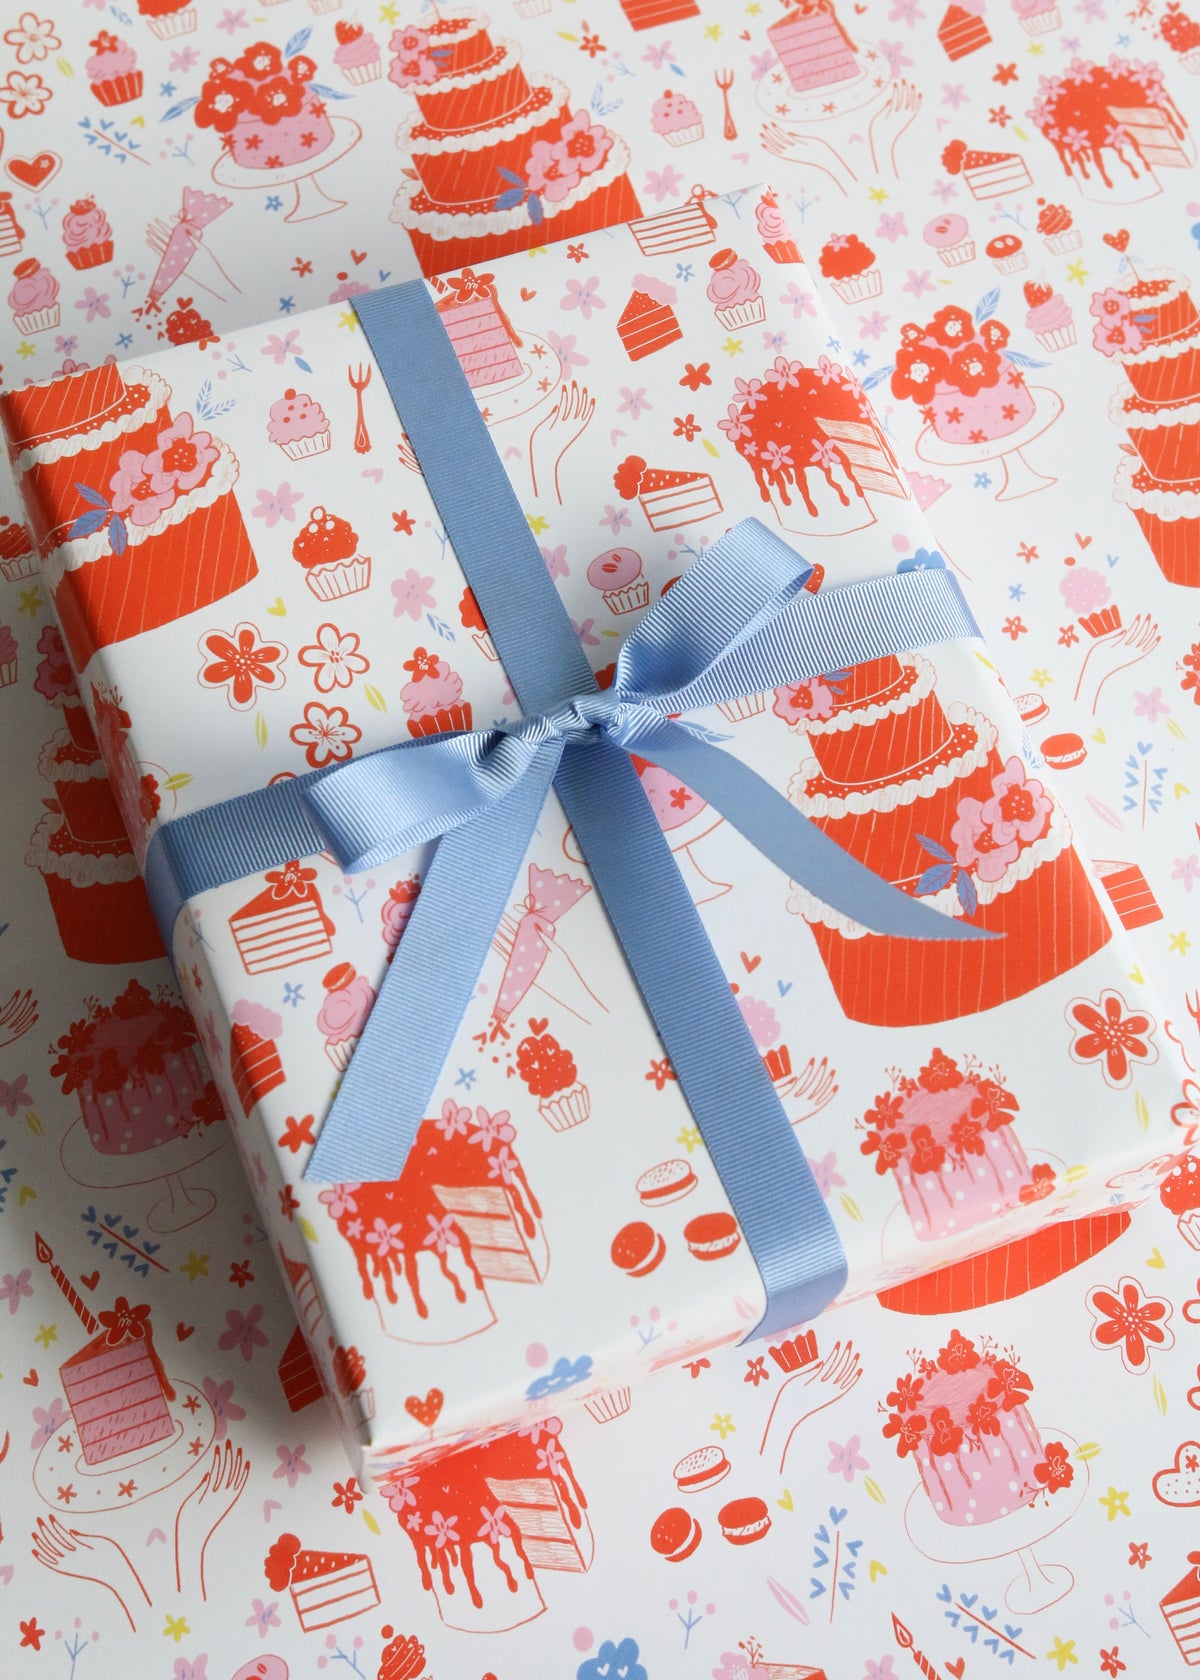 Cake & Cupcakes Orange Wrapping Paper Close Up with Ribbon